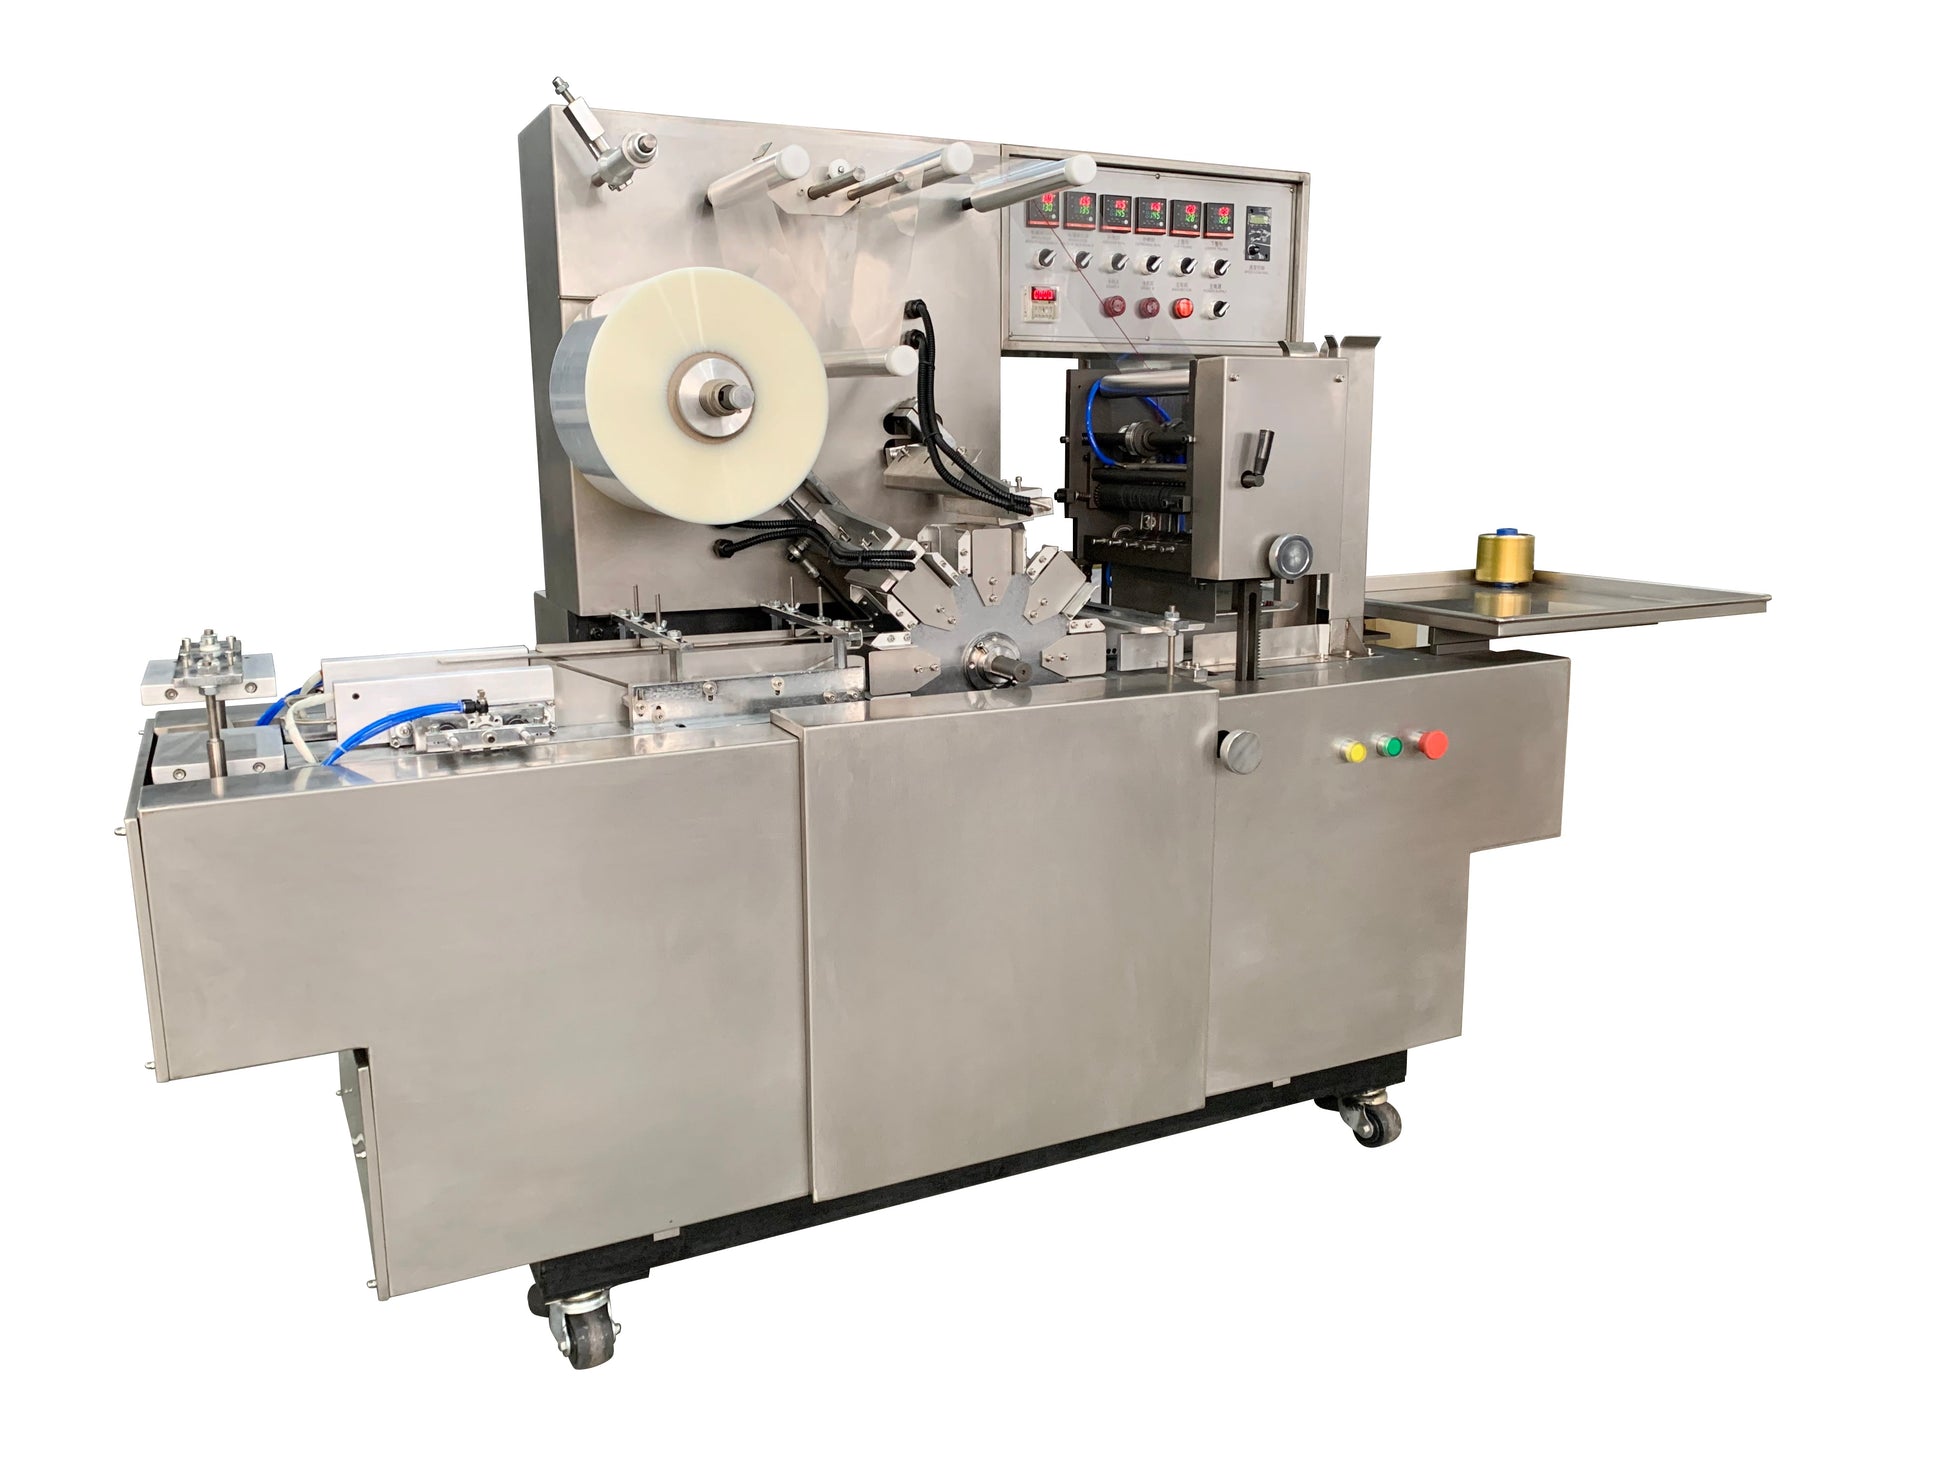 Automatic cellophane wrapping machine Packaging Type Cartons,case,Film,box Driven Type Electric Packaging Material Plastic